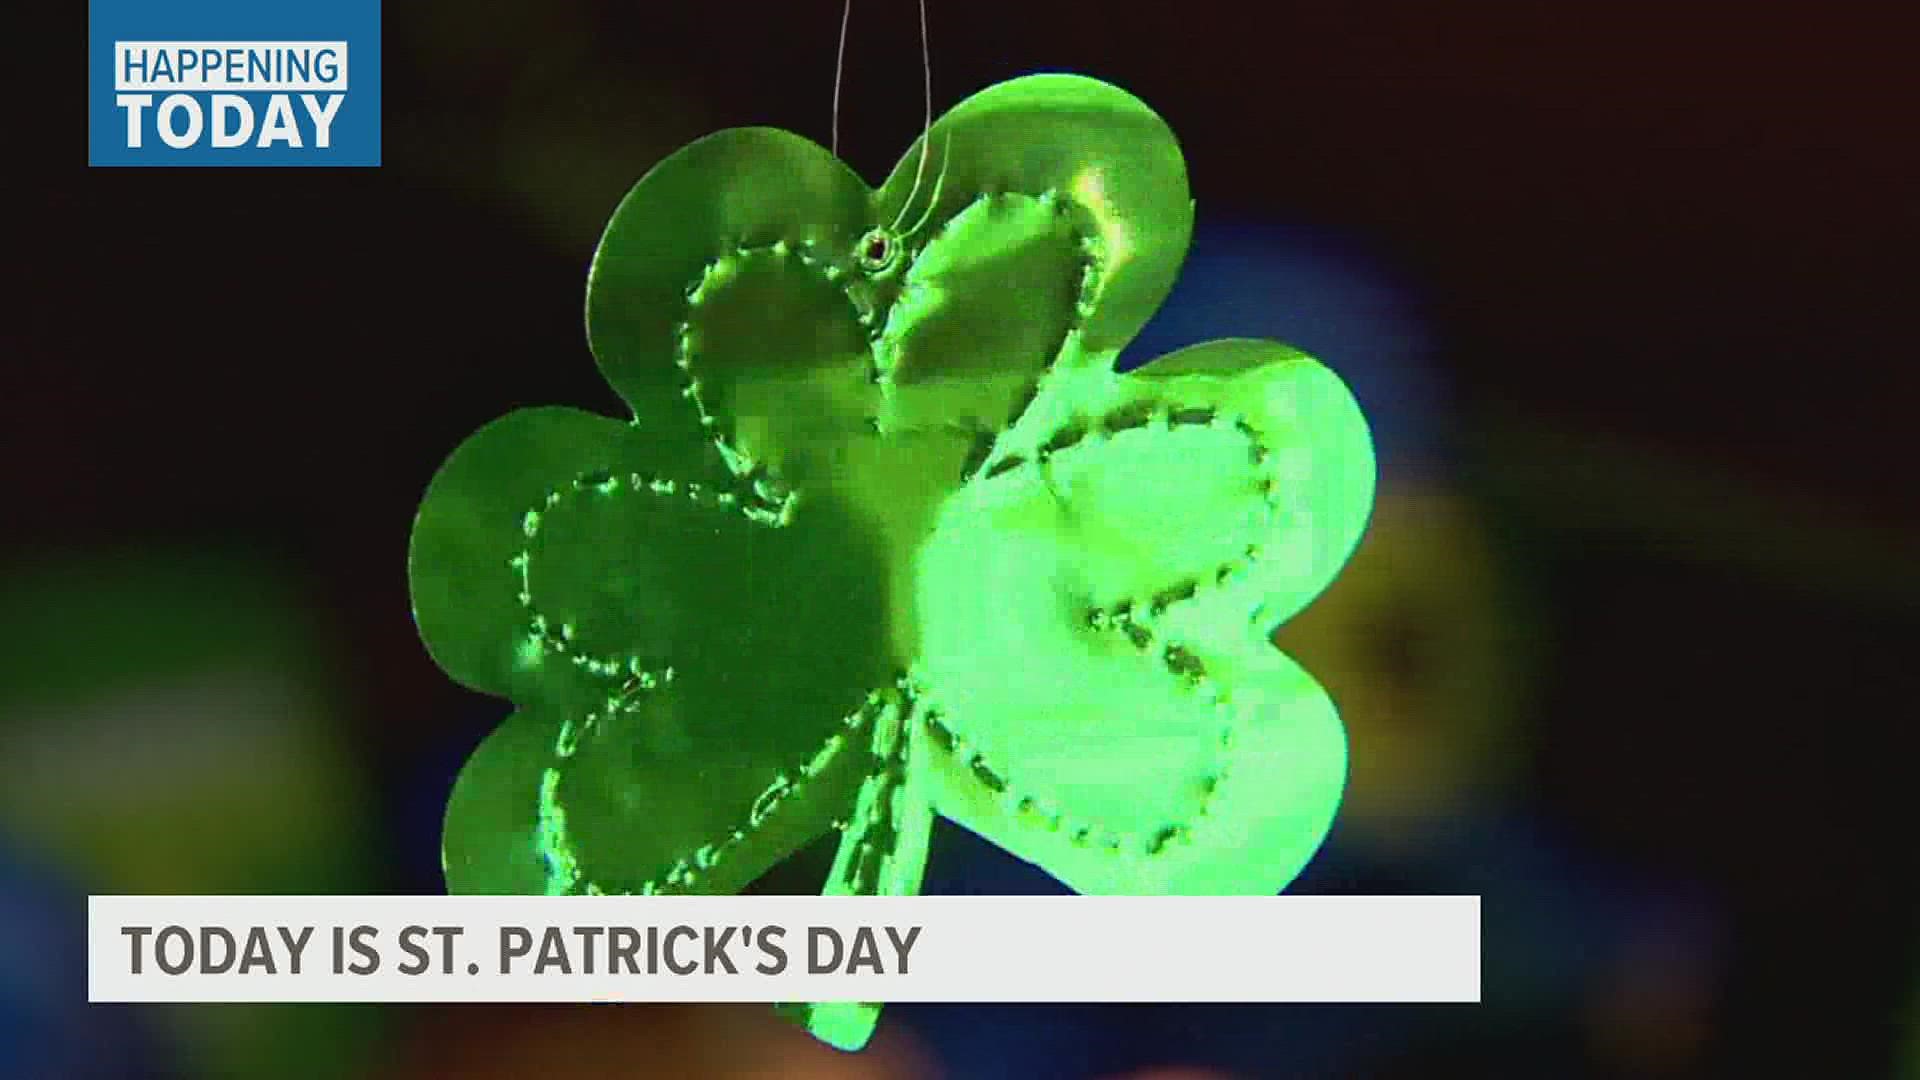 The Irish began observing St. Patrick's Day around the 10th century, where the first feast was held on March 17 in recognition of St. Patrick's death.